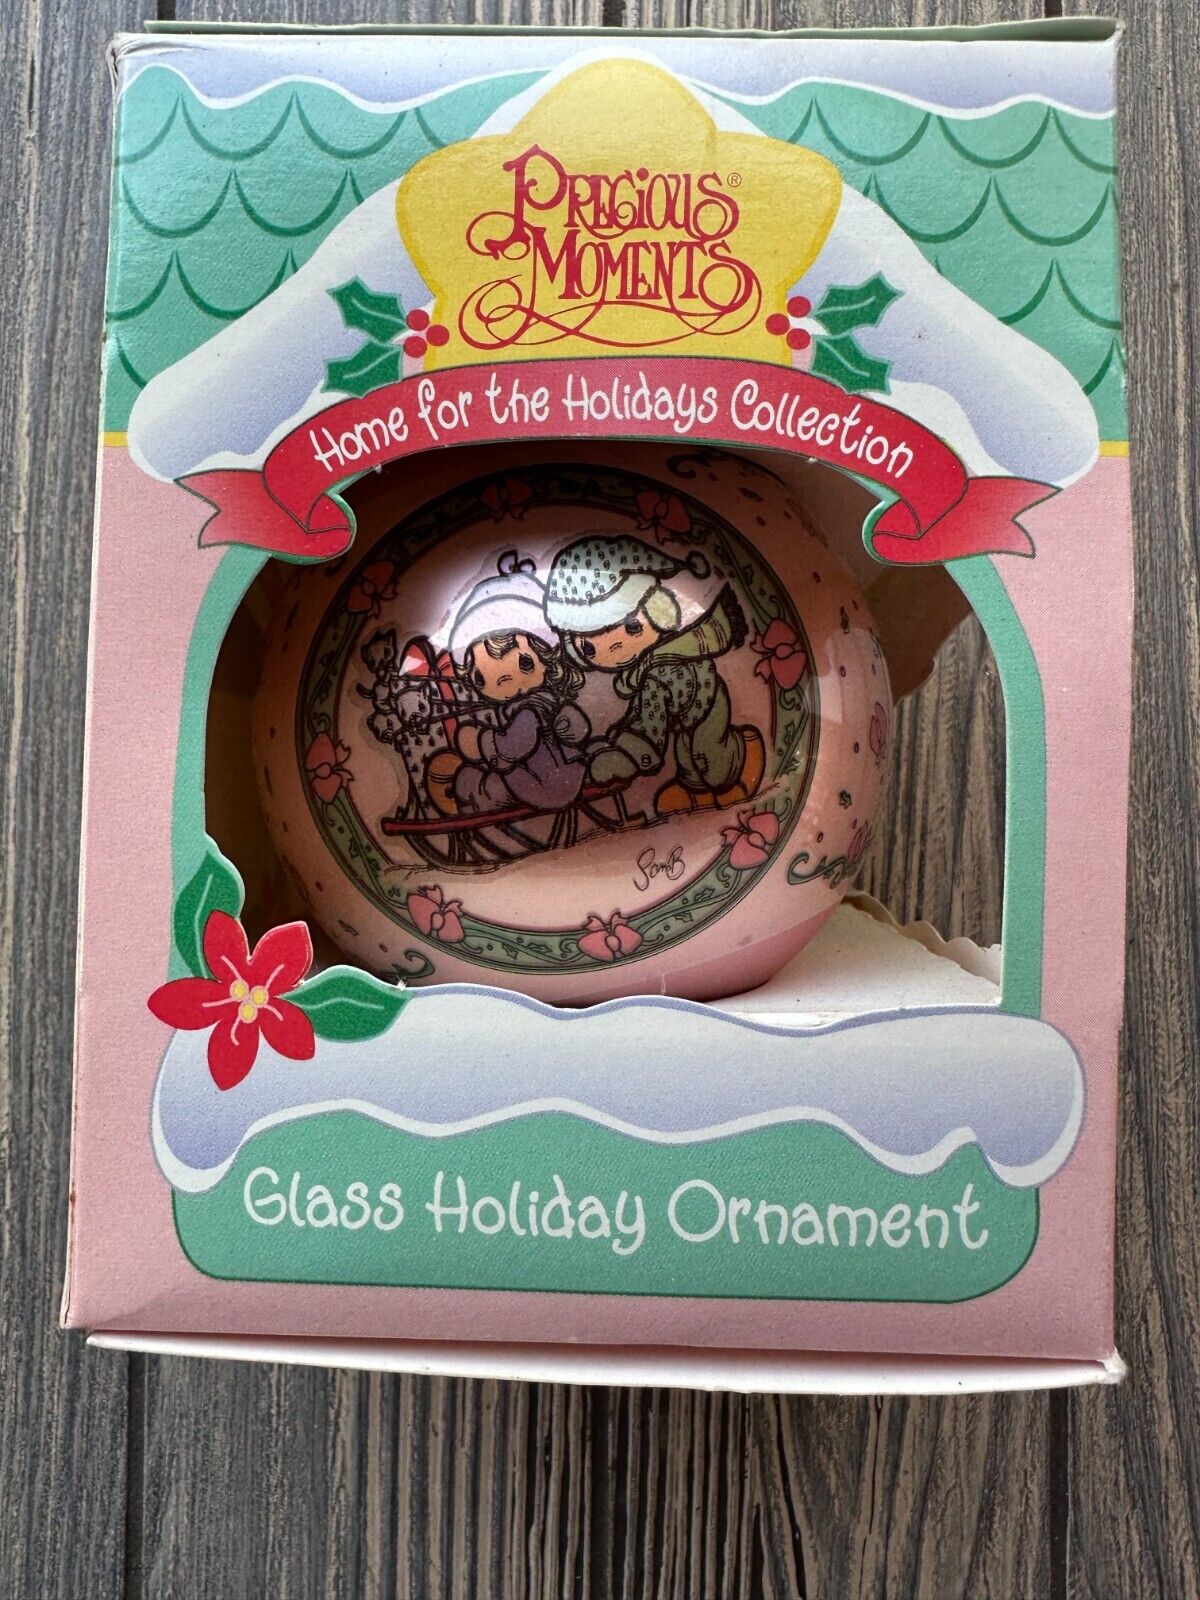 1995 Precious Moments Glass Holiday Ornament Home For The Holidays Collection